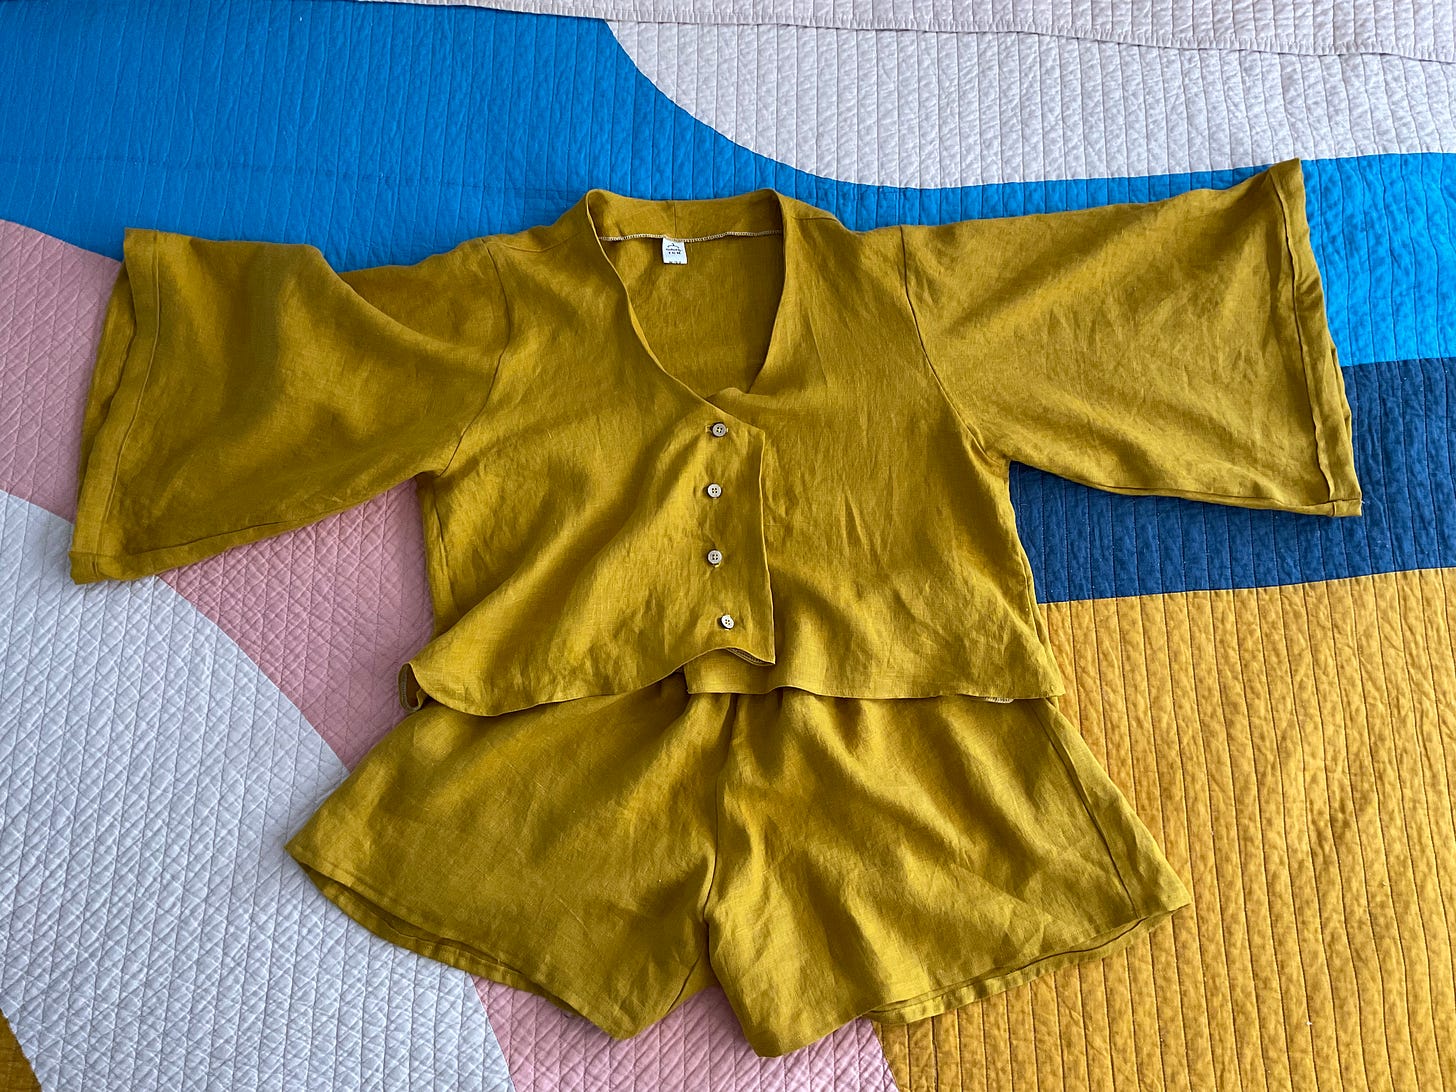 Mustard colored loungewear short set laying on a bed